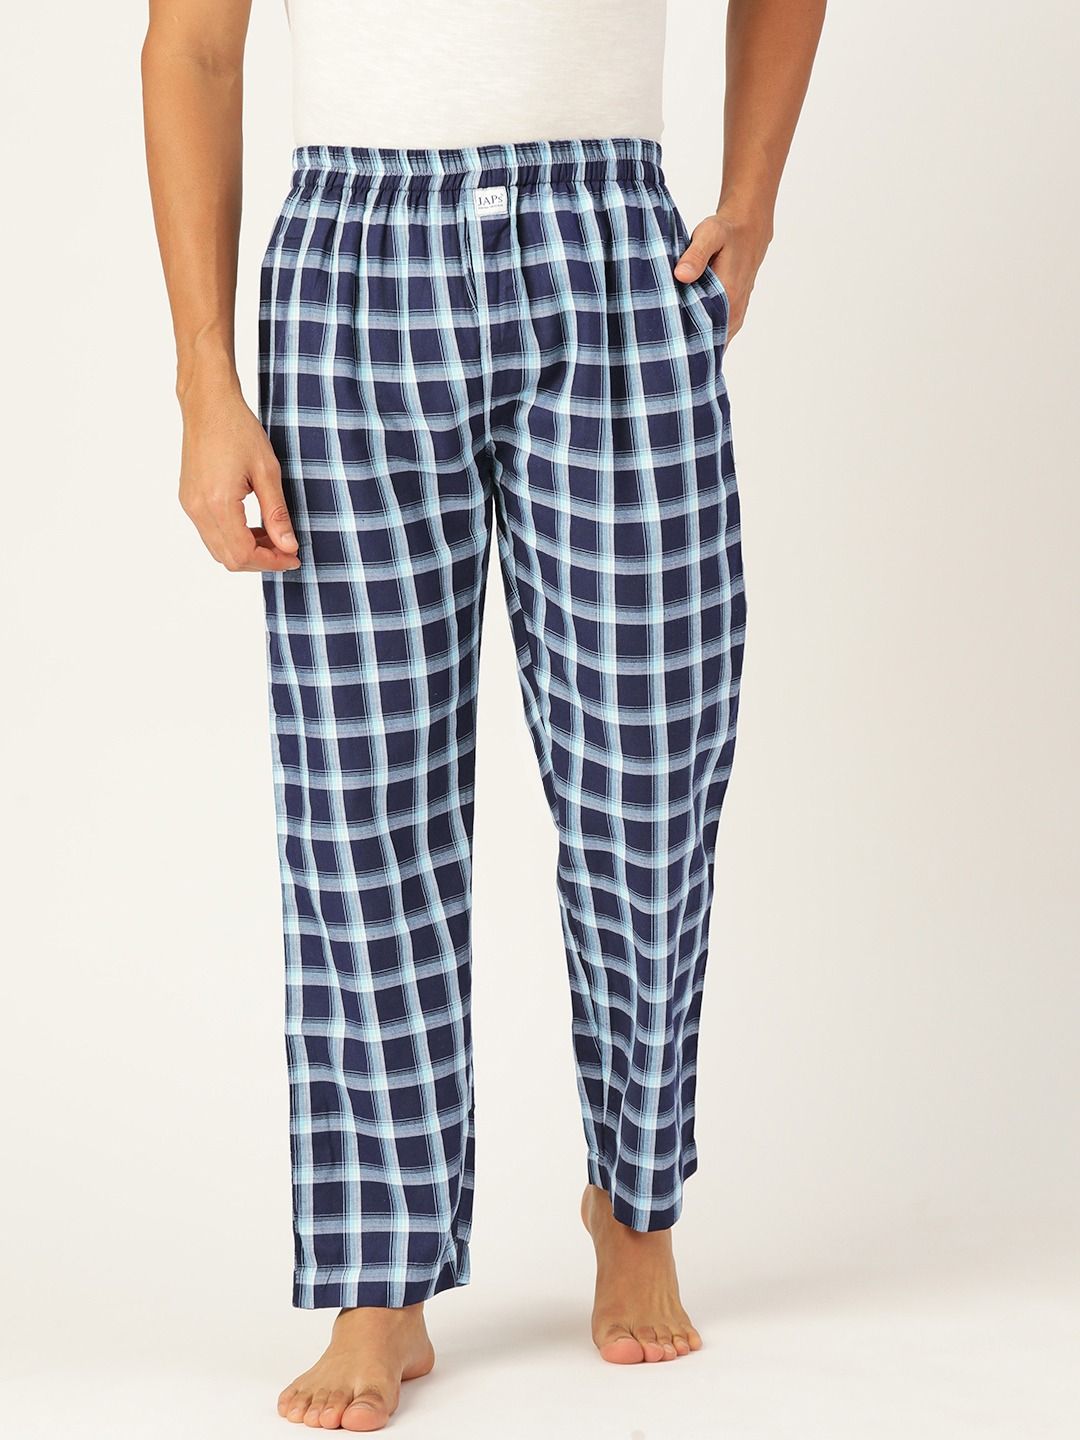 Men's Soft Cotton Solid & Plaid Jersey Knit Sleep Pajama Pants (2- or  3-Pack) - DailySteals